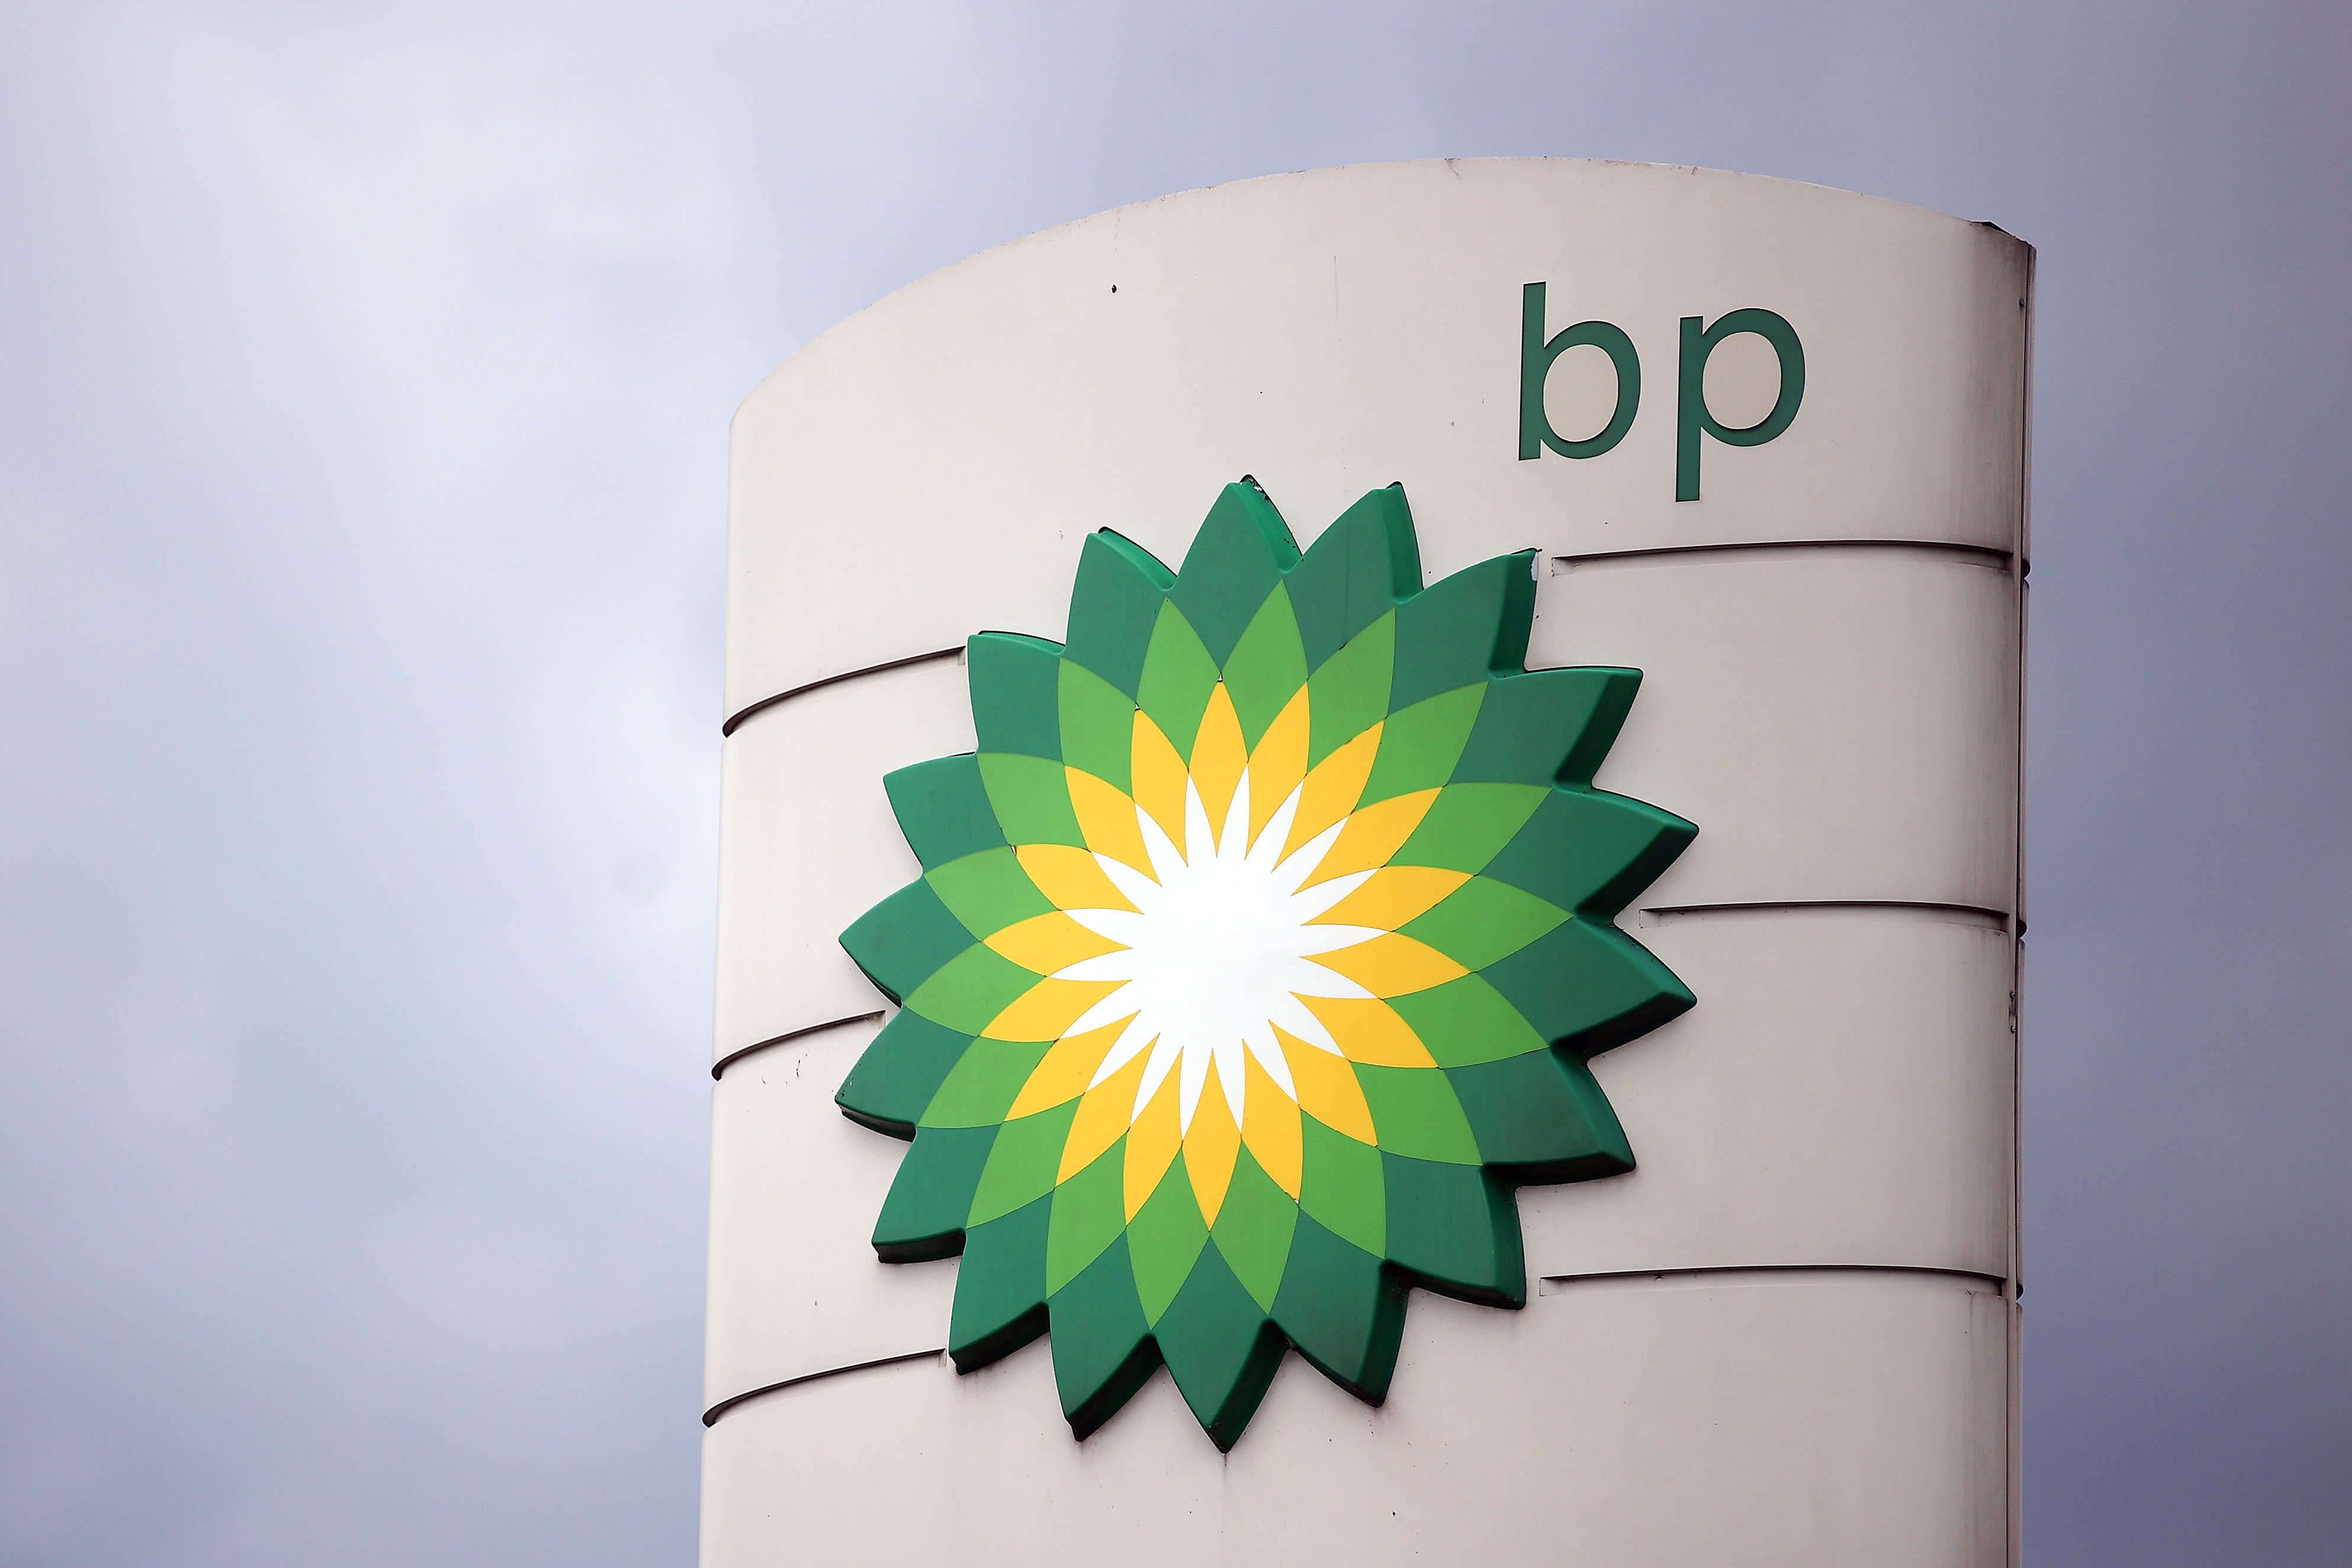 BP will face shareholder revolt after climate strategy U-turn